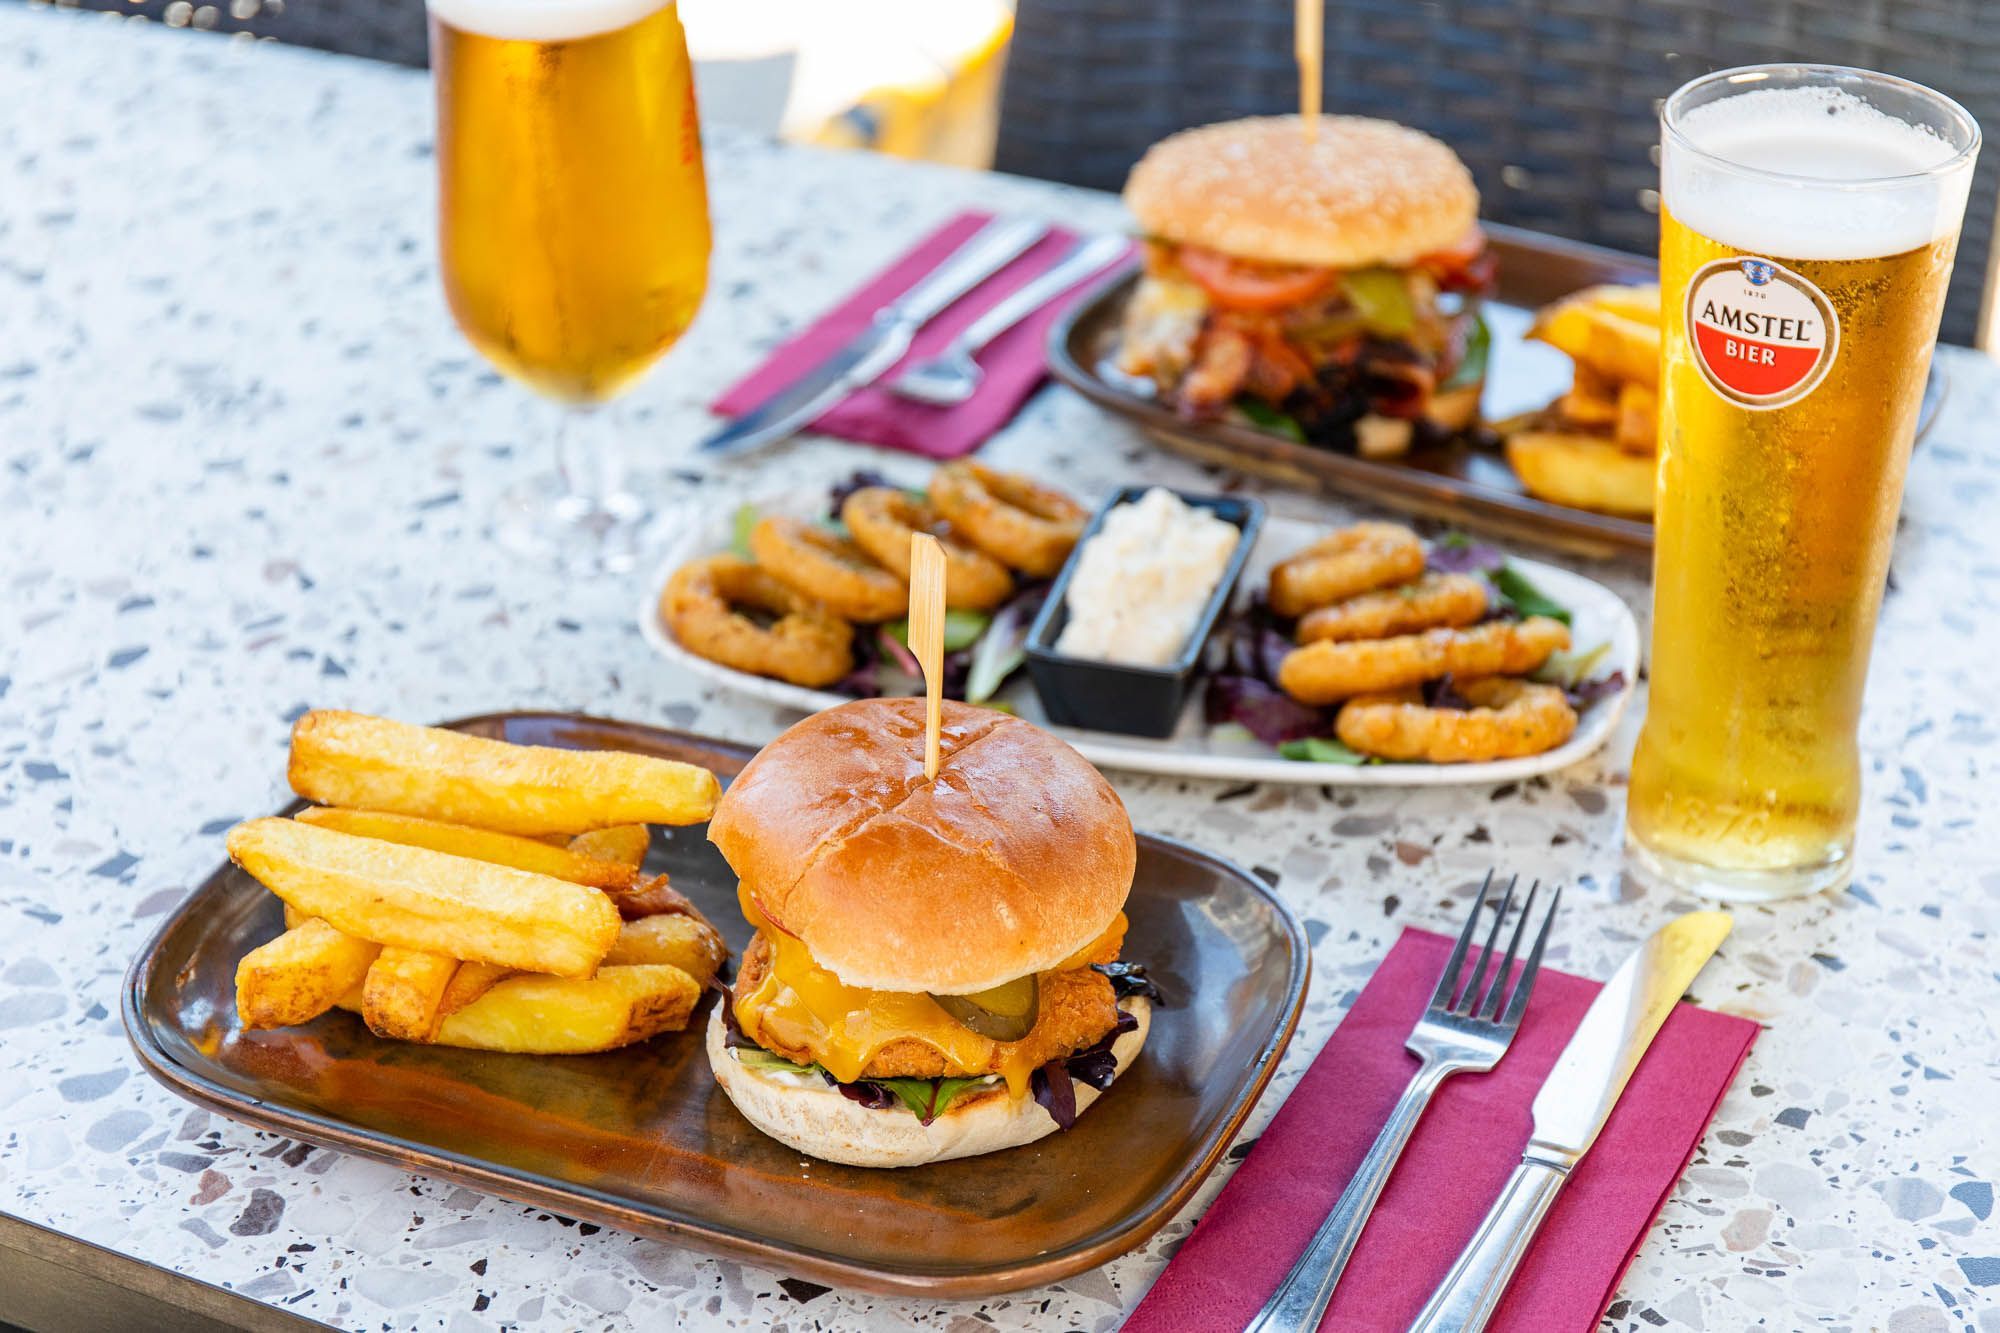 two boards with the burgers and chips, served with some onion rings, sauce and glasses of beer